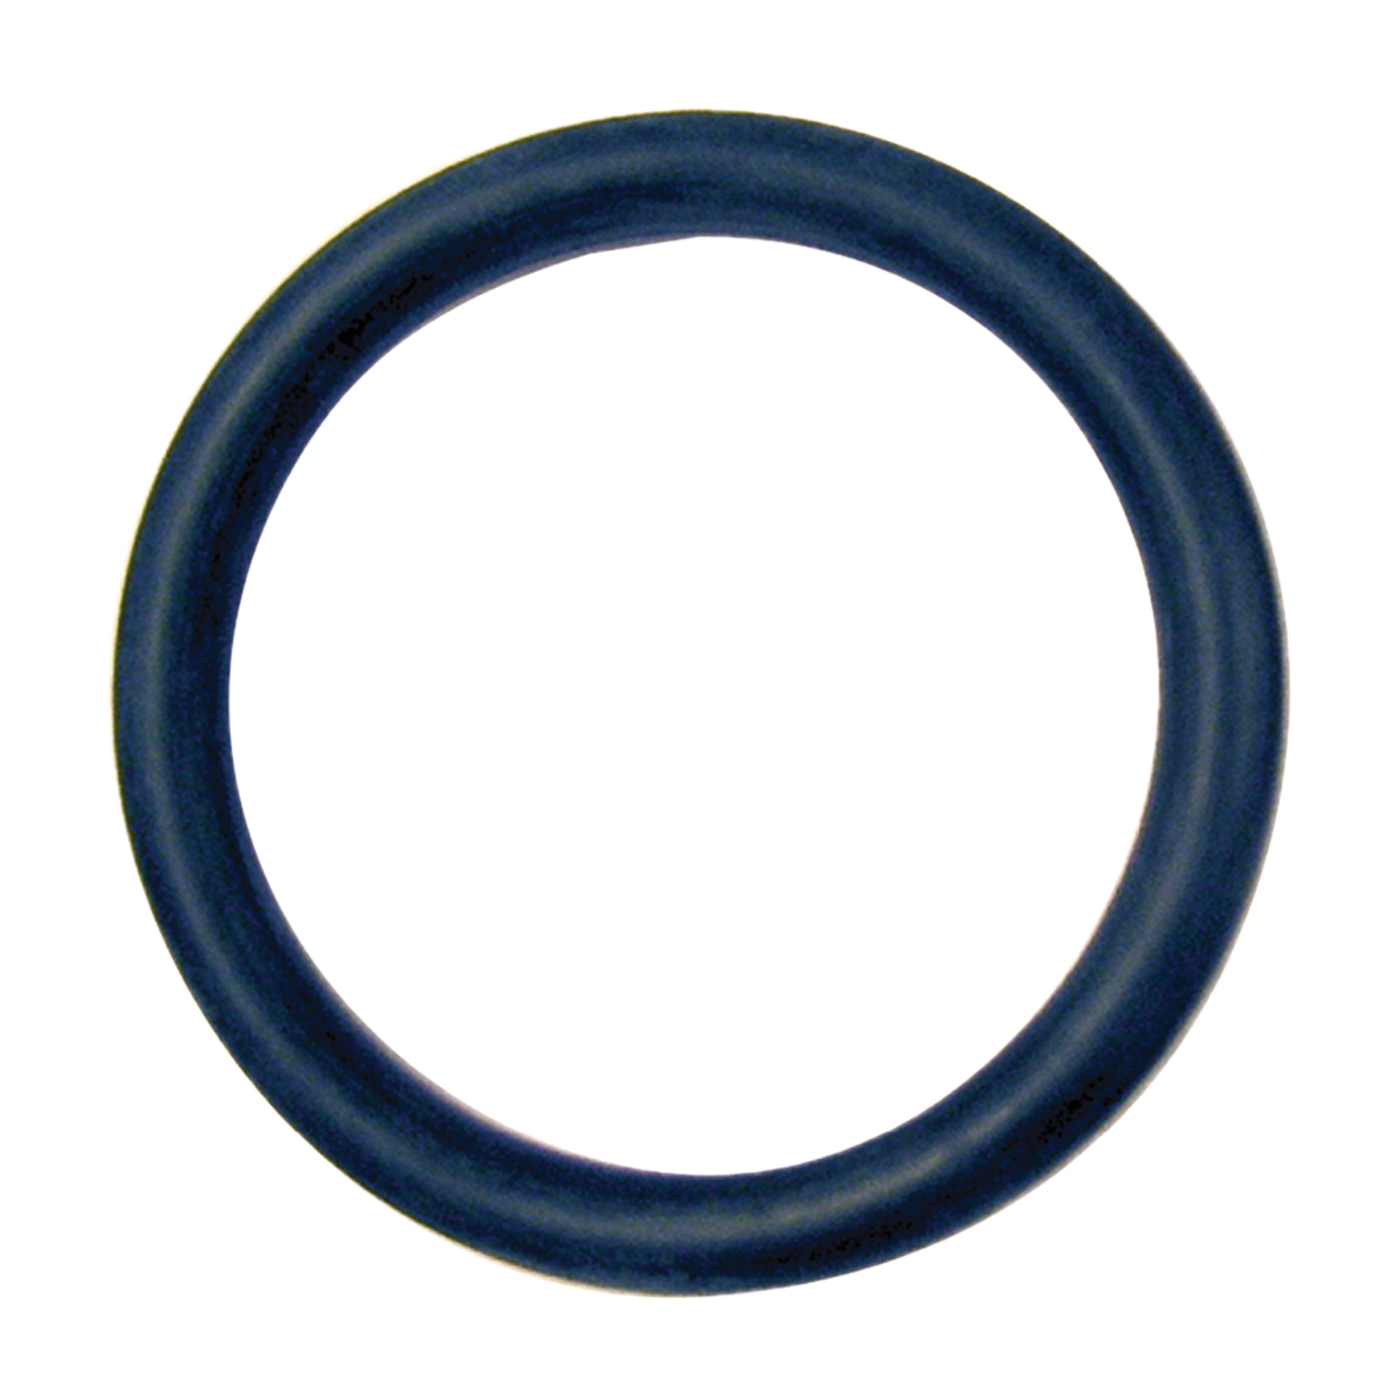 780053 Faucet O-Ring, 1-1/16 in ID x 1-1/4 in OD Dia, 3/32 in Thick